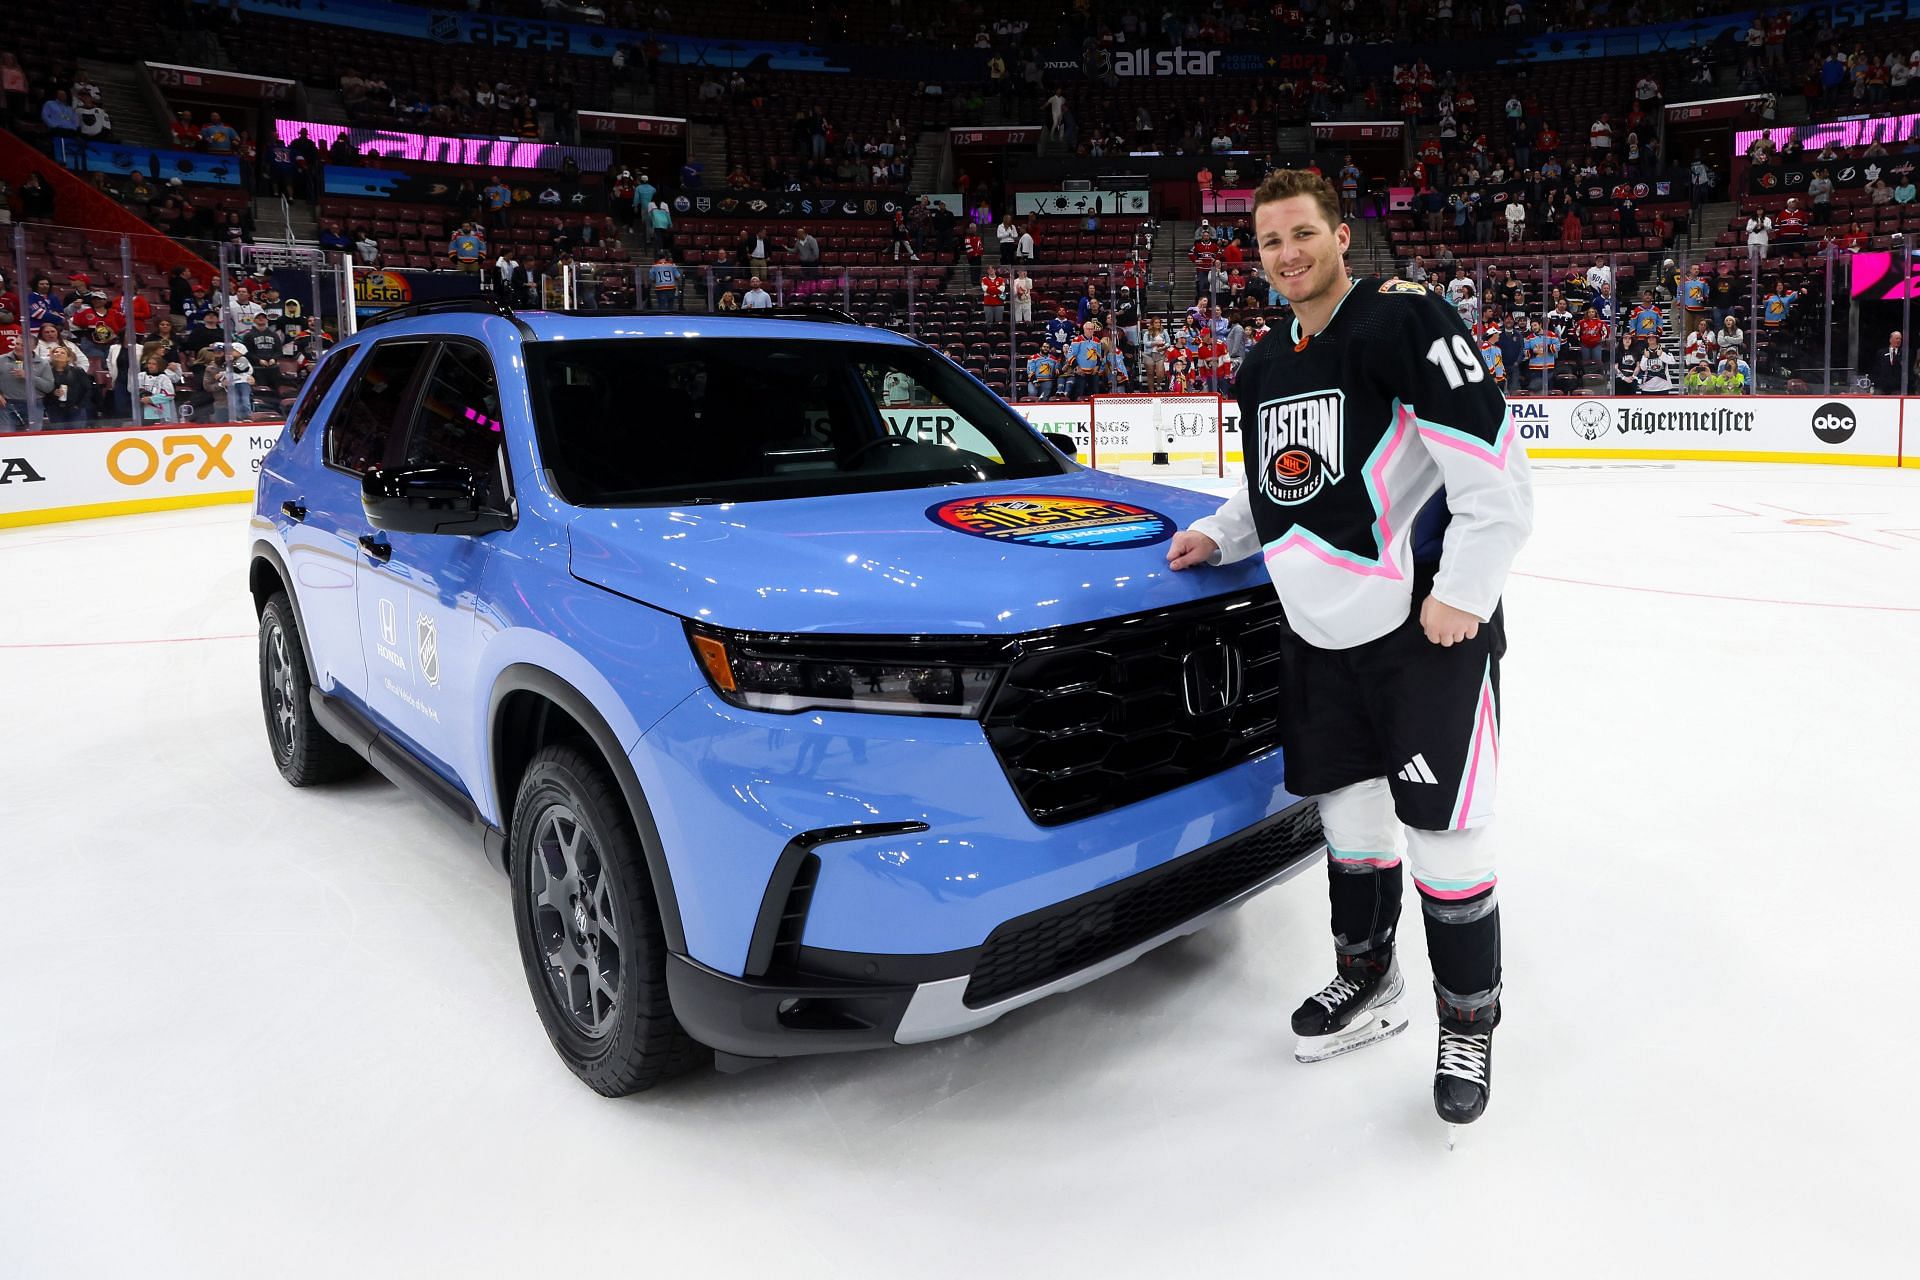 Matthew Tkachuk #19 of the Florida Panthers after winning the MVP award in the 2023 NHL All-Star Game (Photo by Bruce Bennett/Getty Images)